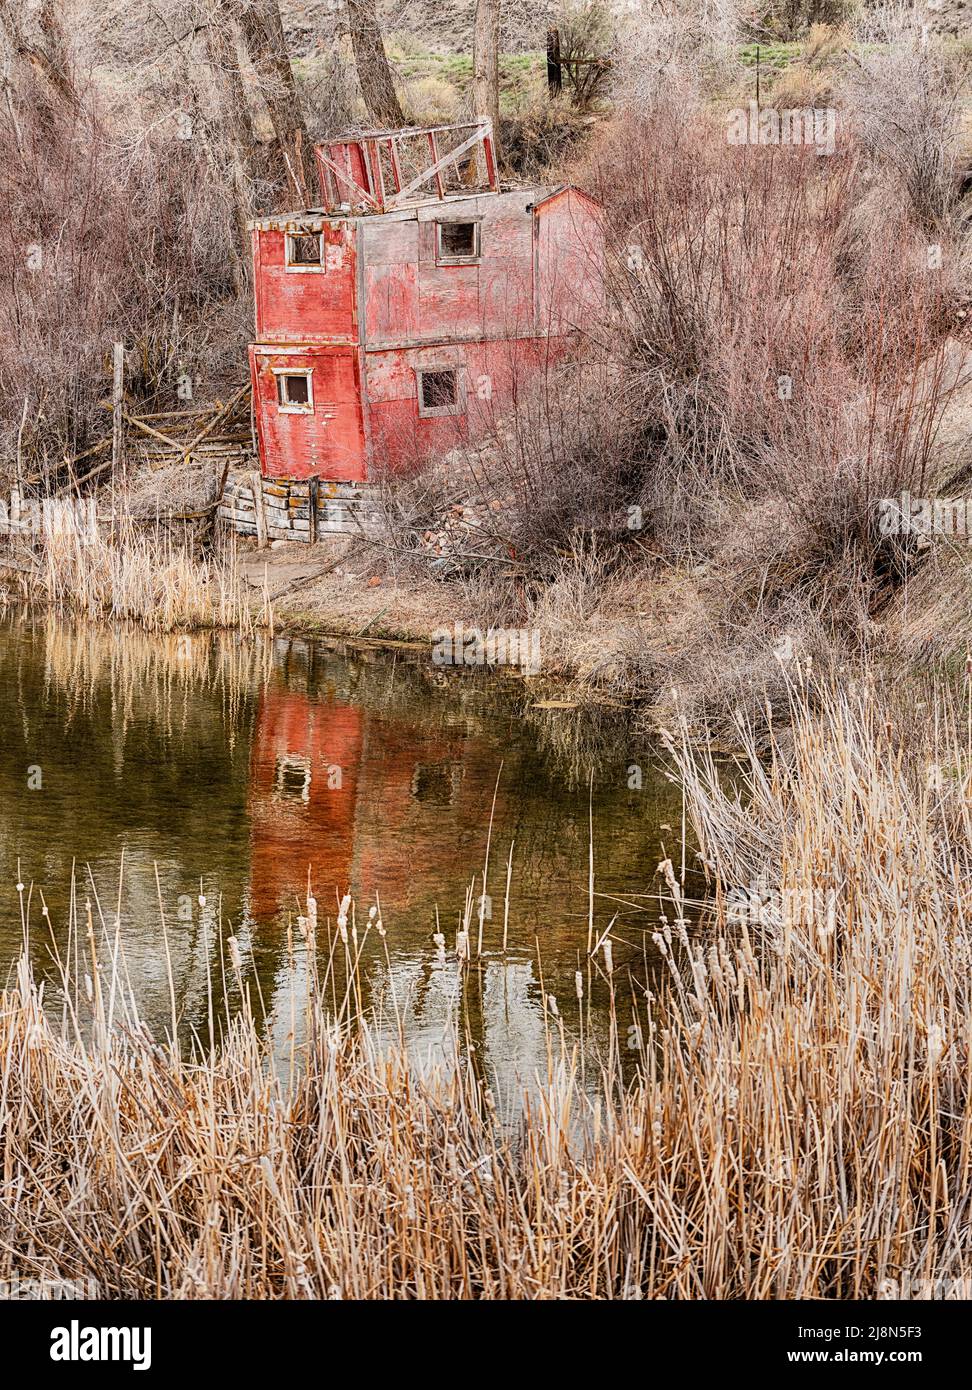 An old red fishing cabin is located next to a small pond in Colorado. Stock Photo